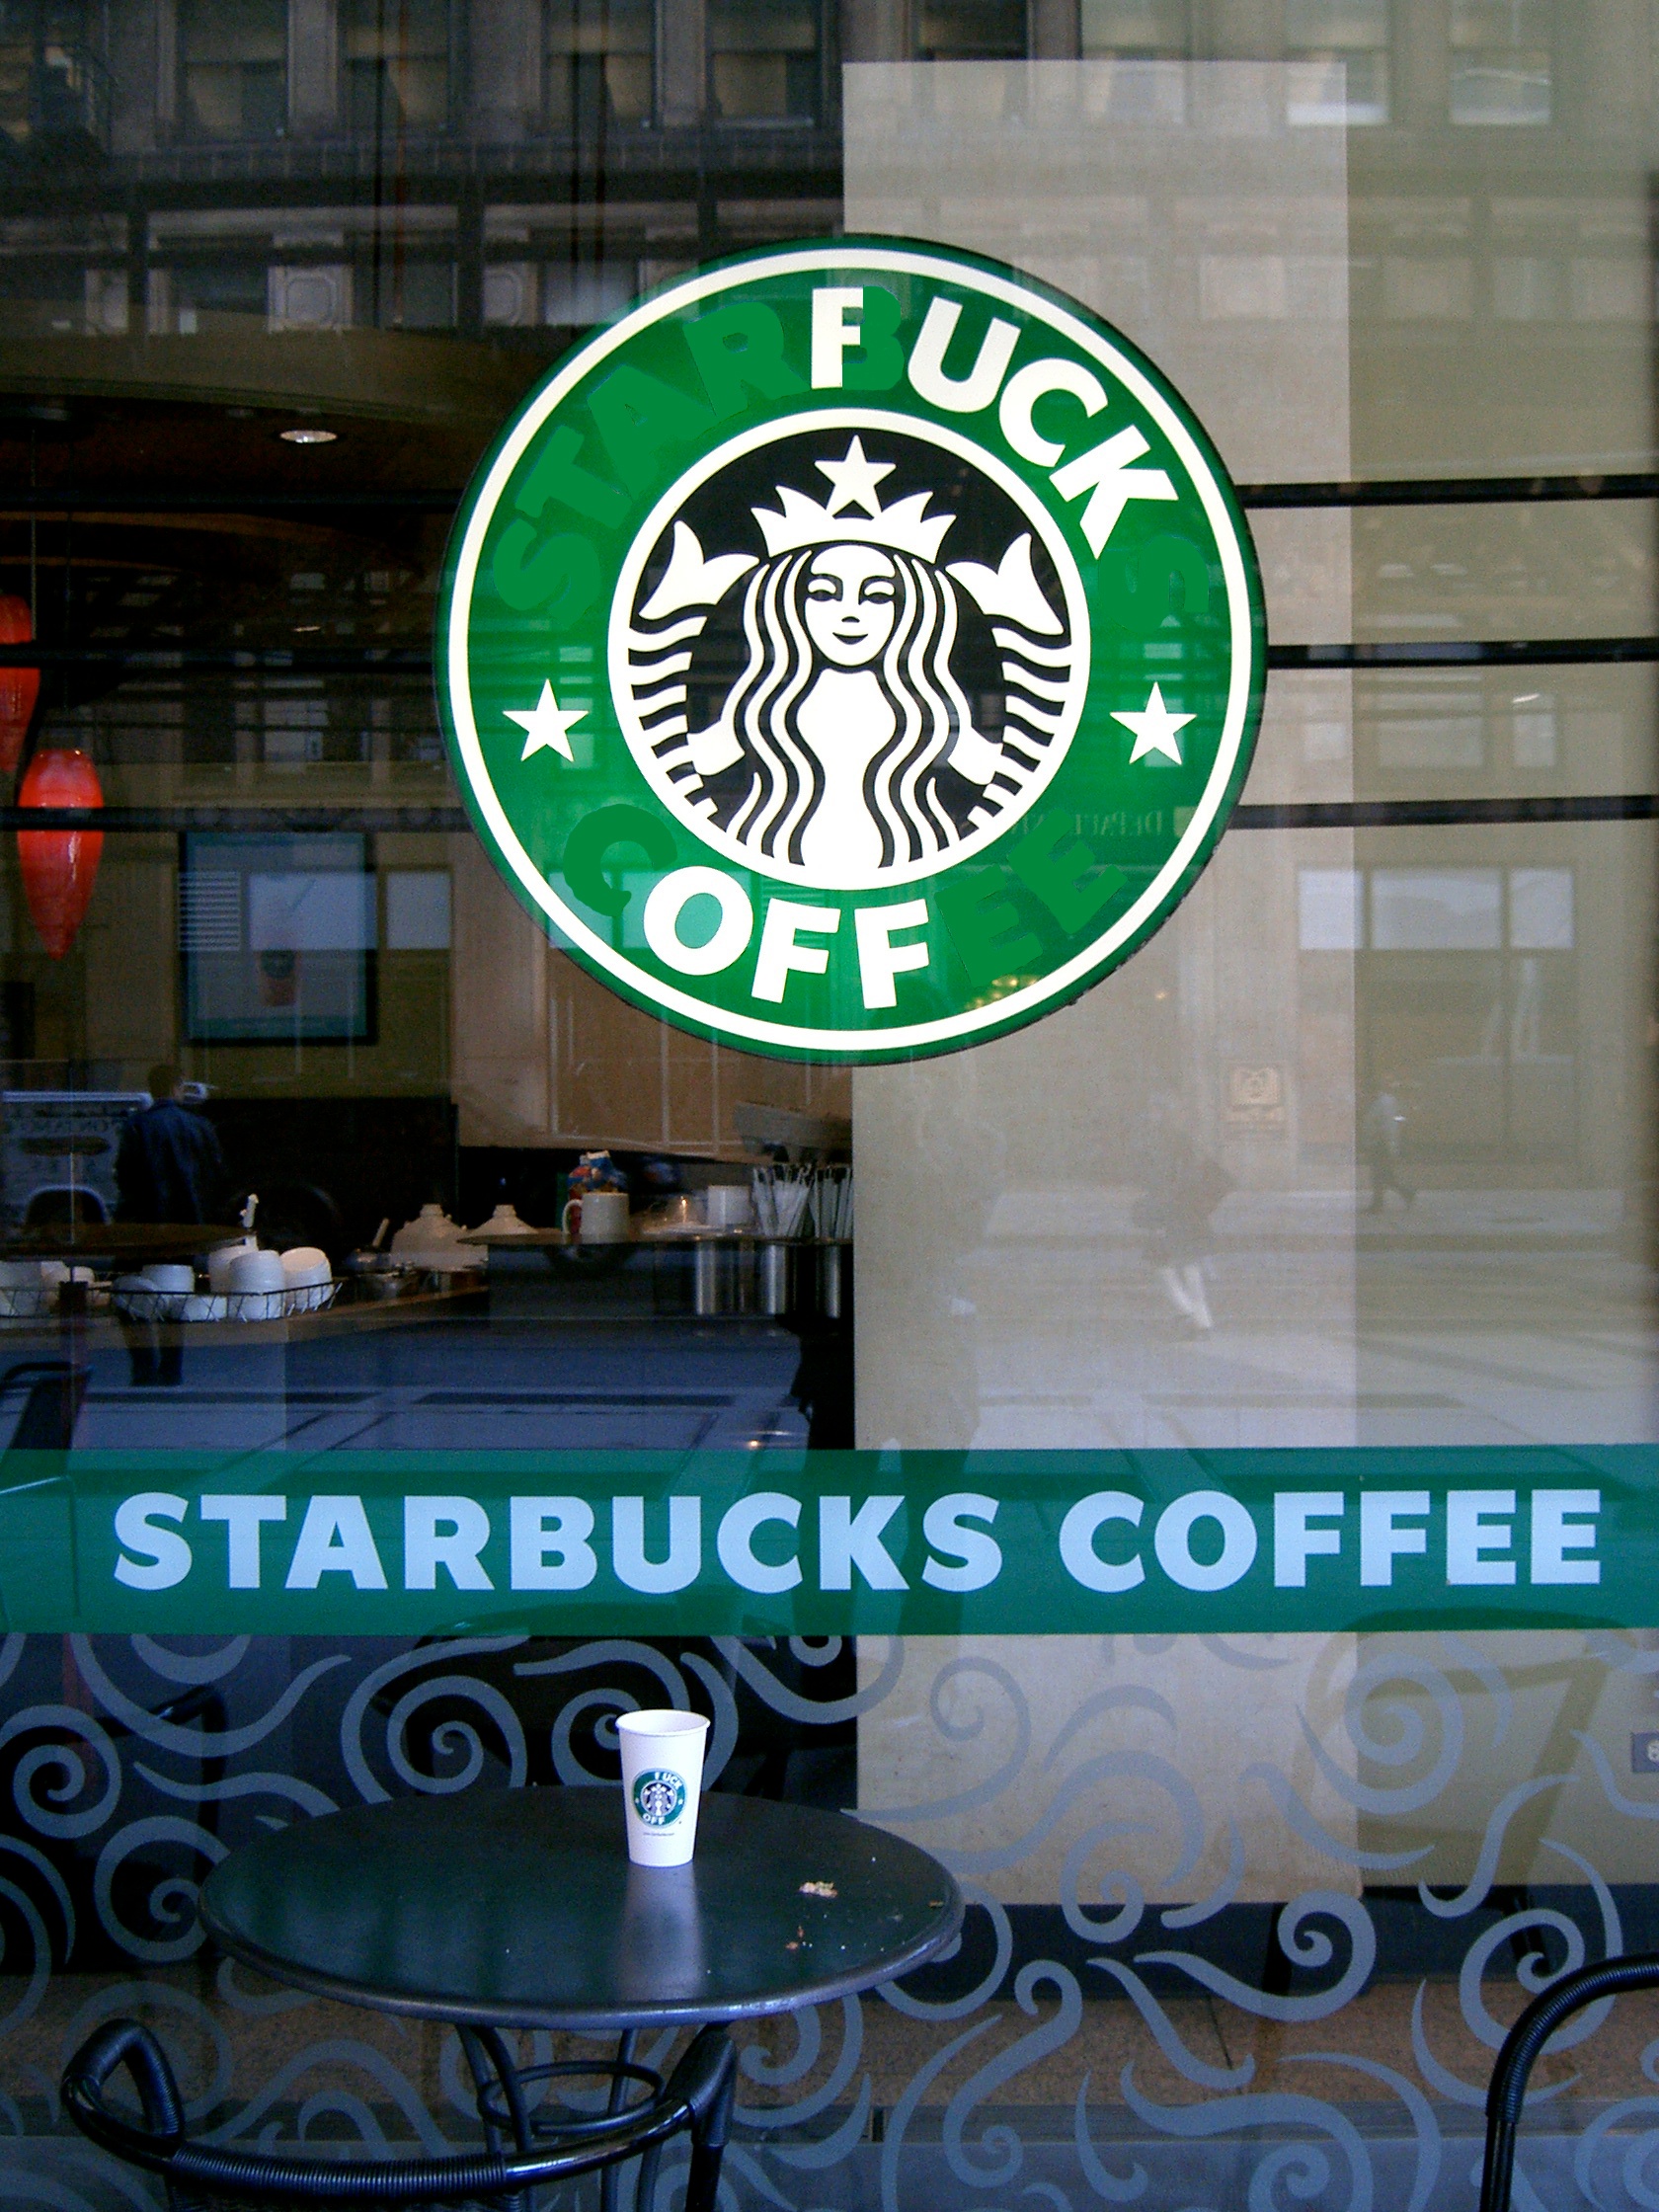 the front glass window of a Starbucks coffee shop with adapted logo to read 'fuck off'